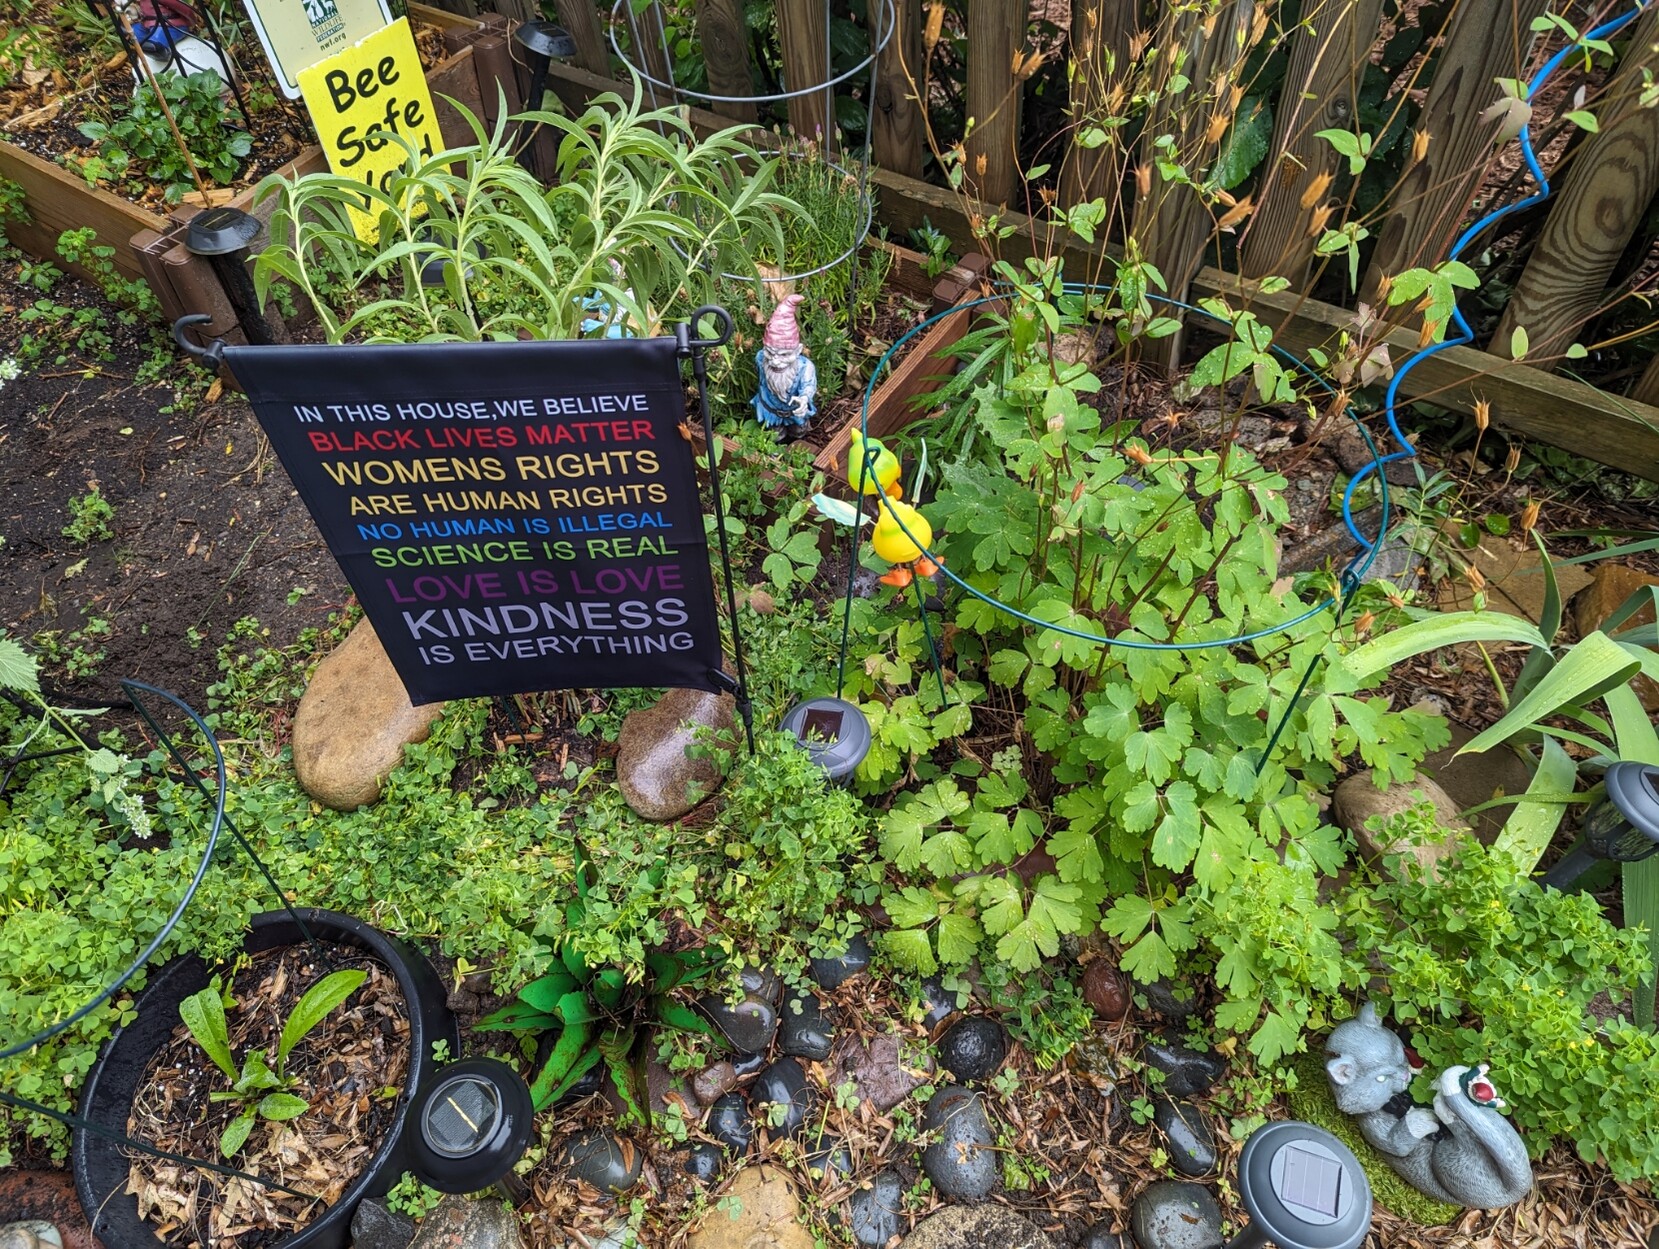 Middle of my rain garden. There are three monster statues and a garden flag with the "in this house we believe ... kindness is everything" quote. There are also "bee safe" & "gardening fir wildlife" signs in the background. Statues: Bottom right: kaiju <br />kitty fighting gnomes Upper left: 2 zombie gnomes in the lavender bed. Middle: flying rubber ducky, mooning the camera Other plants include: miniature sunflowers, about to bloom, columbine going to seed, stubborn irises that are not yet producing flowers. <br />There are also some clover plants that I am leaving to provide shade.